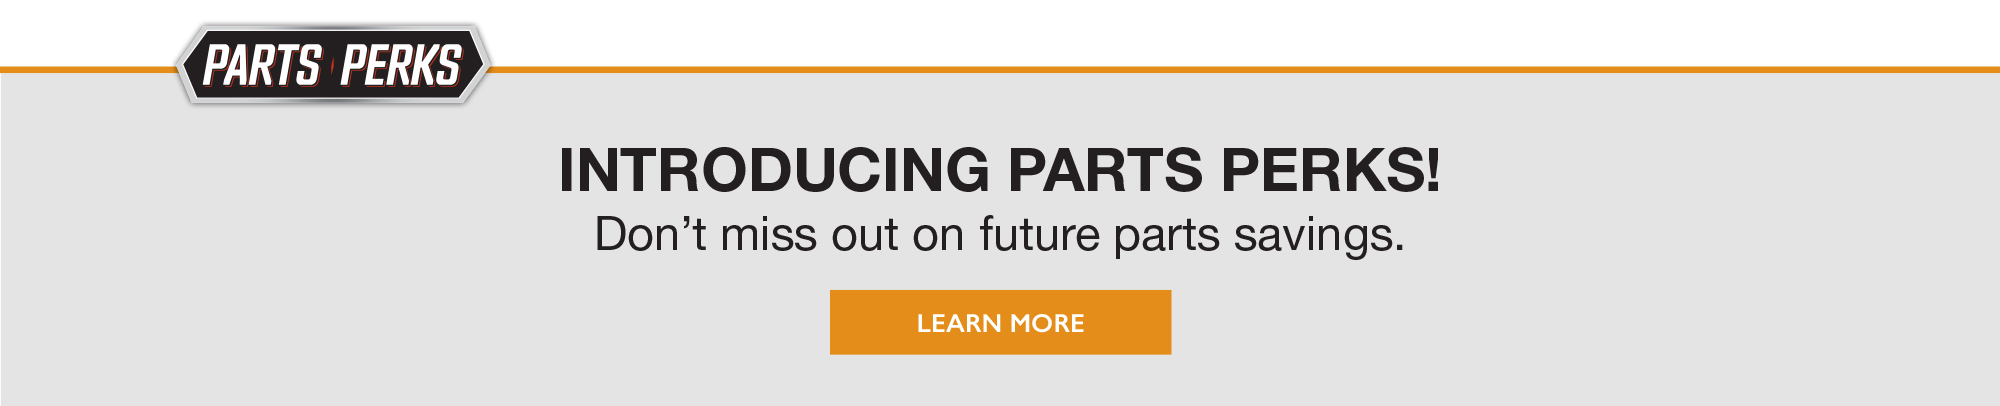 Introducing Parts Perks! Don't miss out on future parts savings.